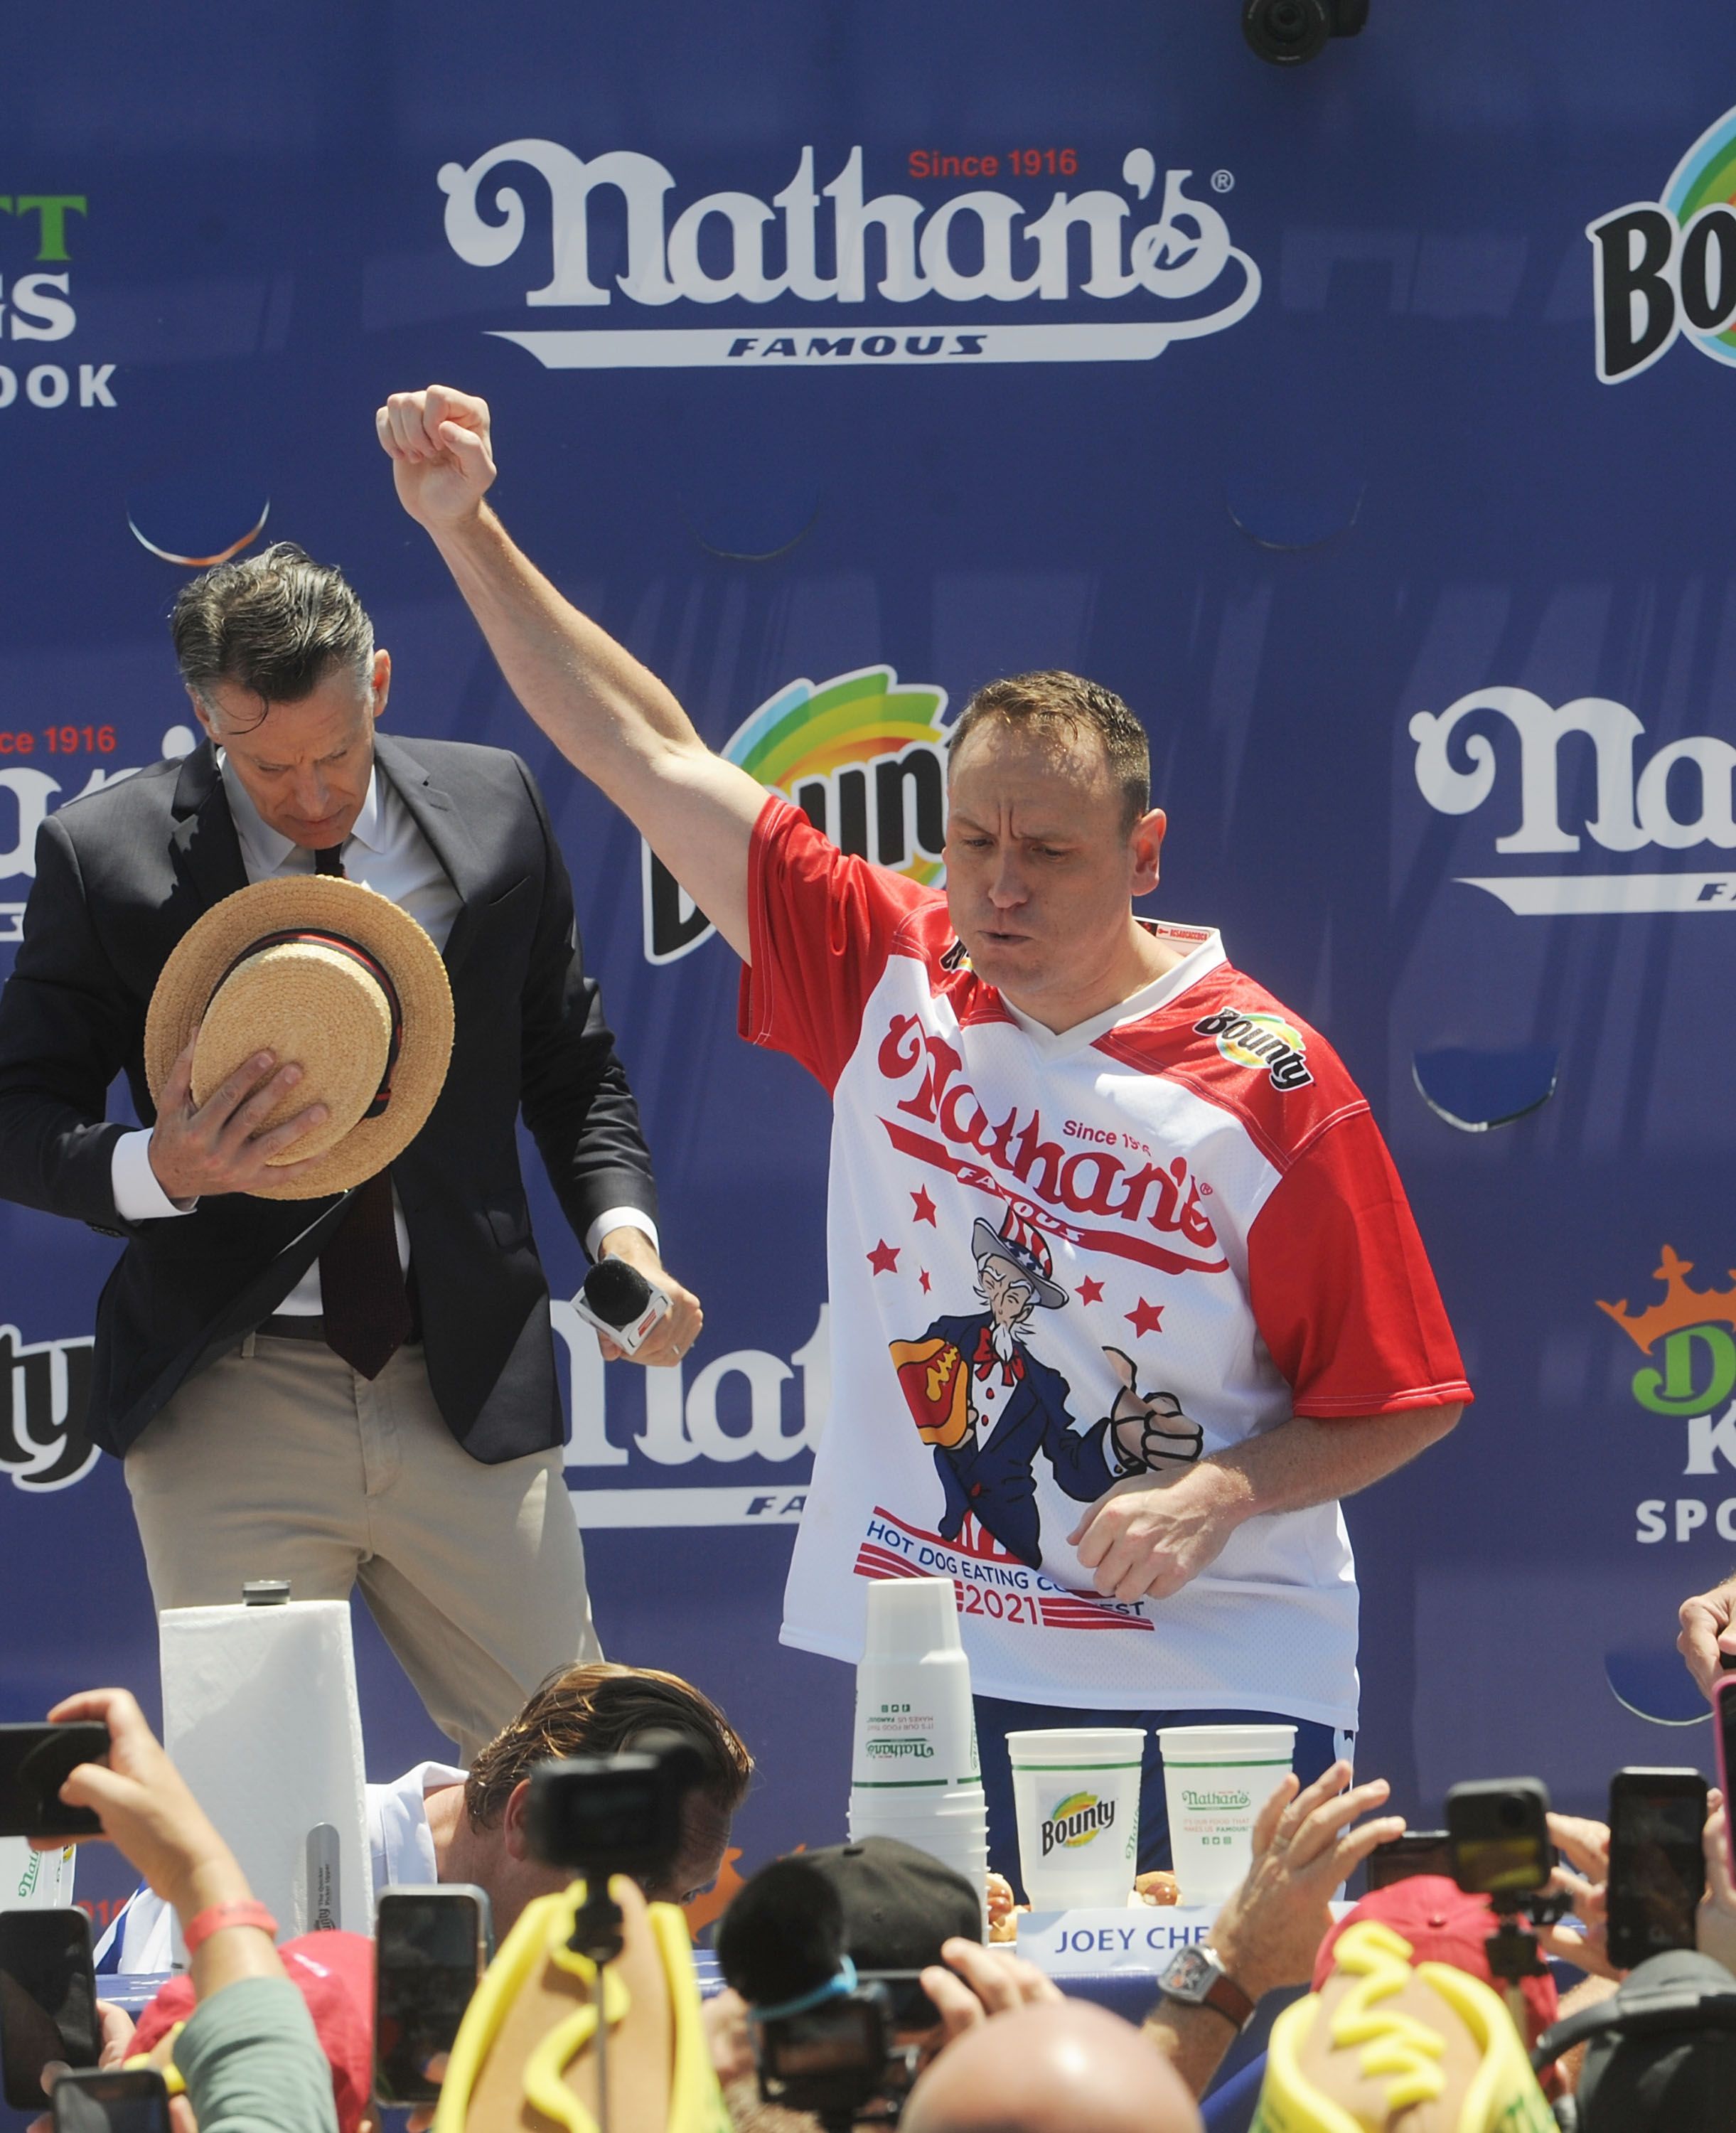 Defending Champion Joey Chestnut wins after consuming 76 hot dogs and setting a new world record at the 2021 Nathan's Famous International Hot Dog Eating Contest at Coney Island on July 4